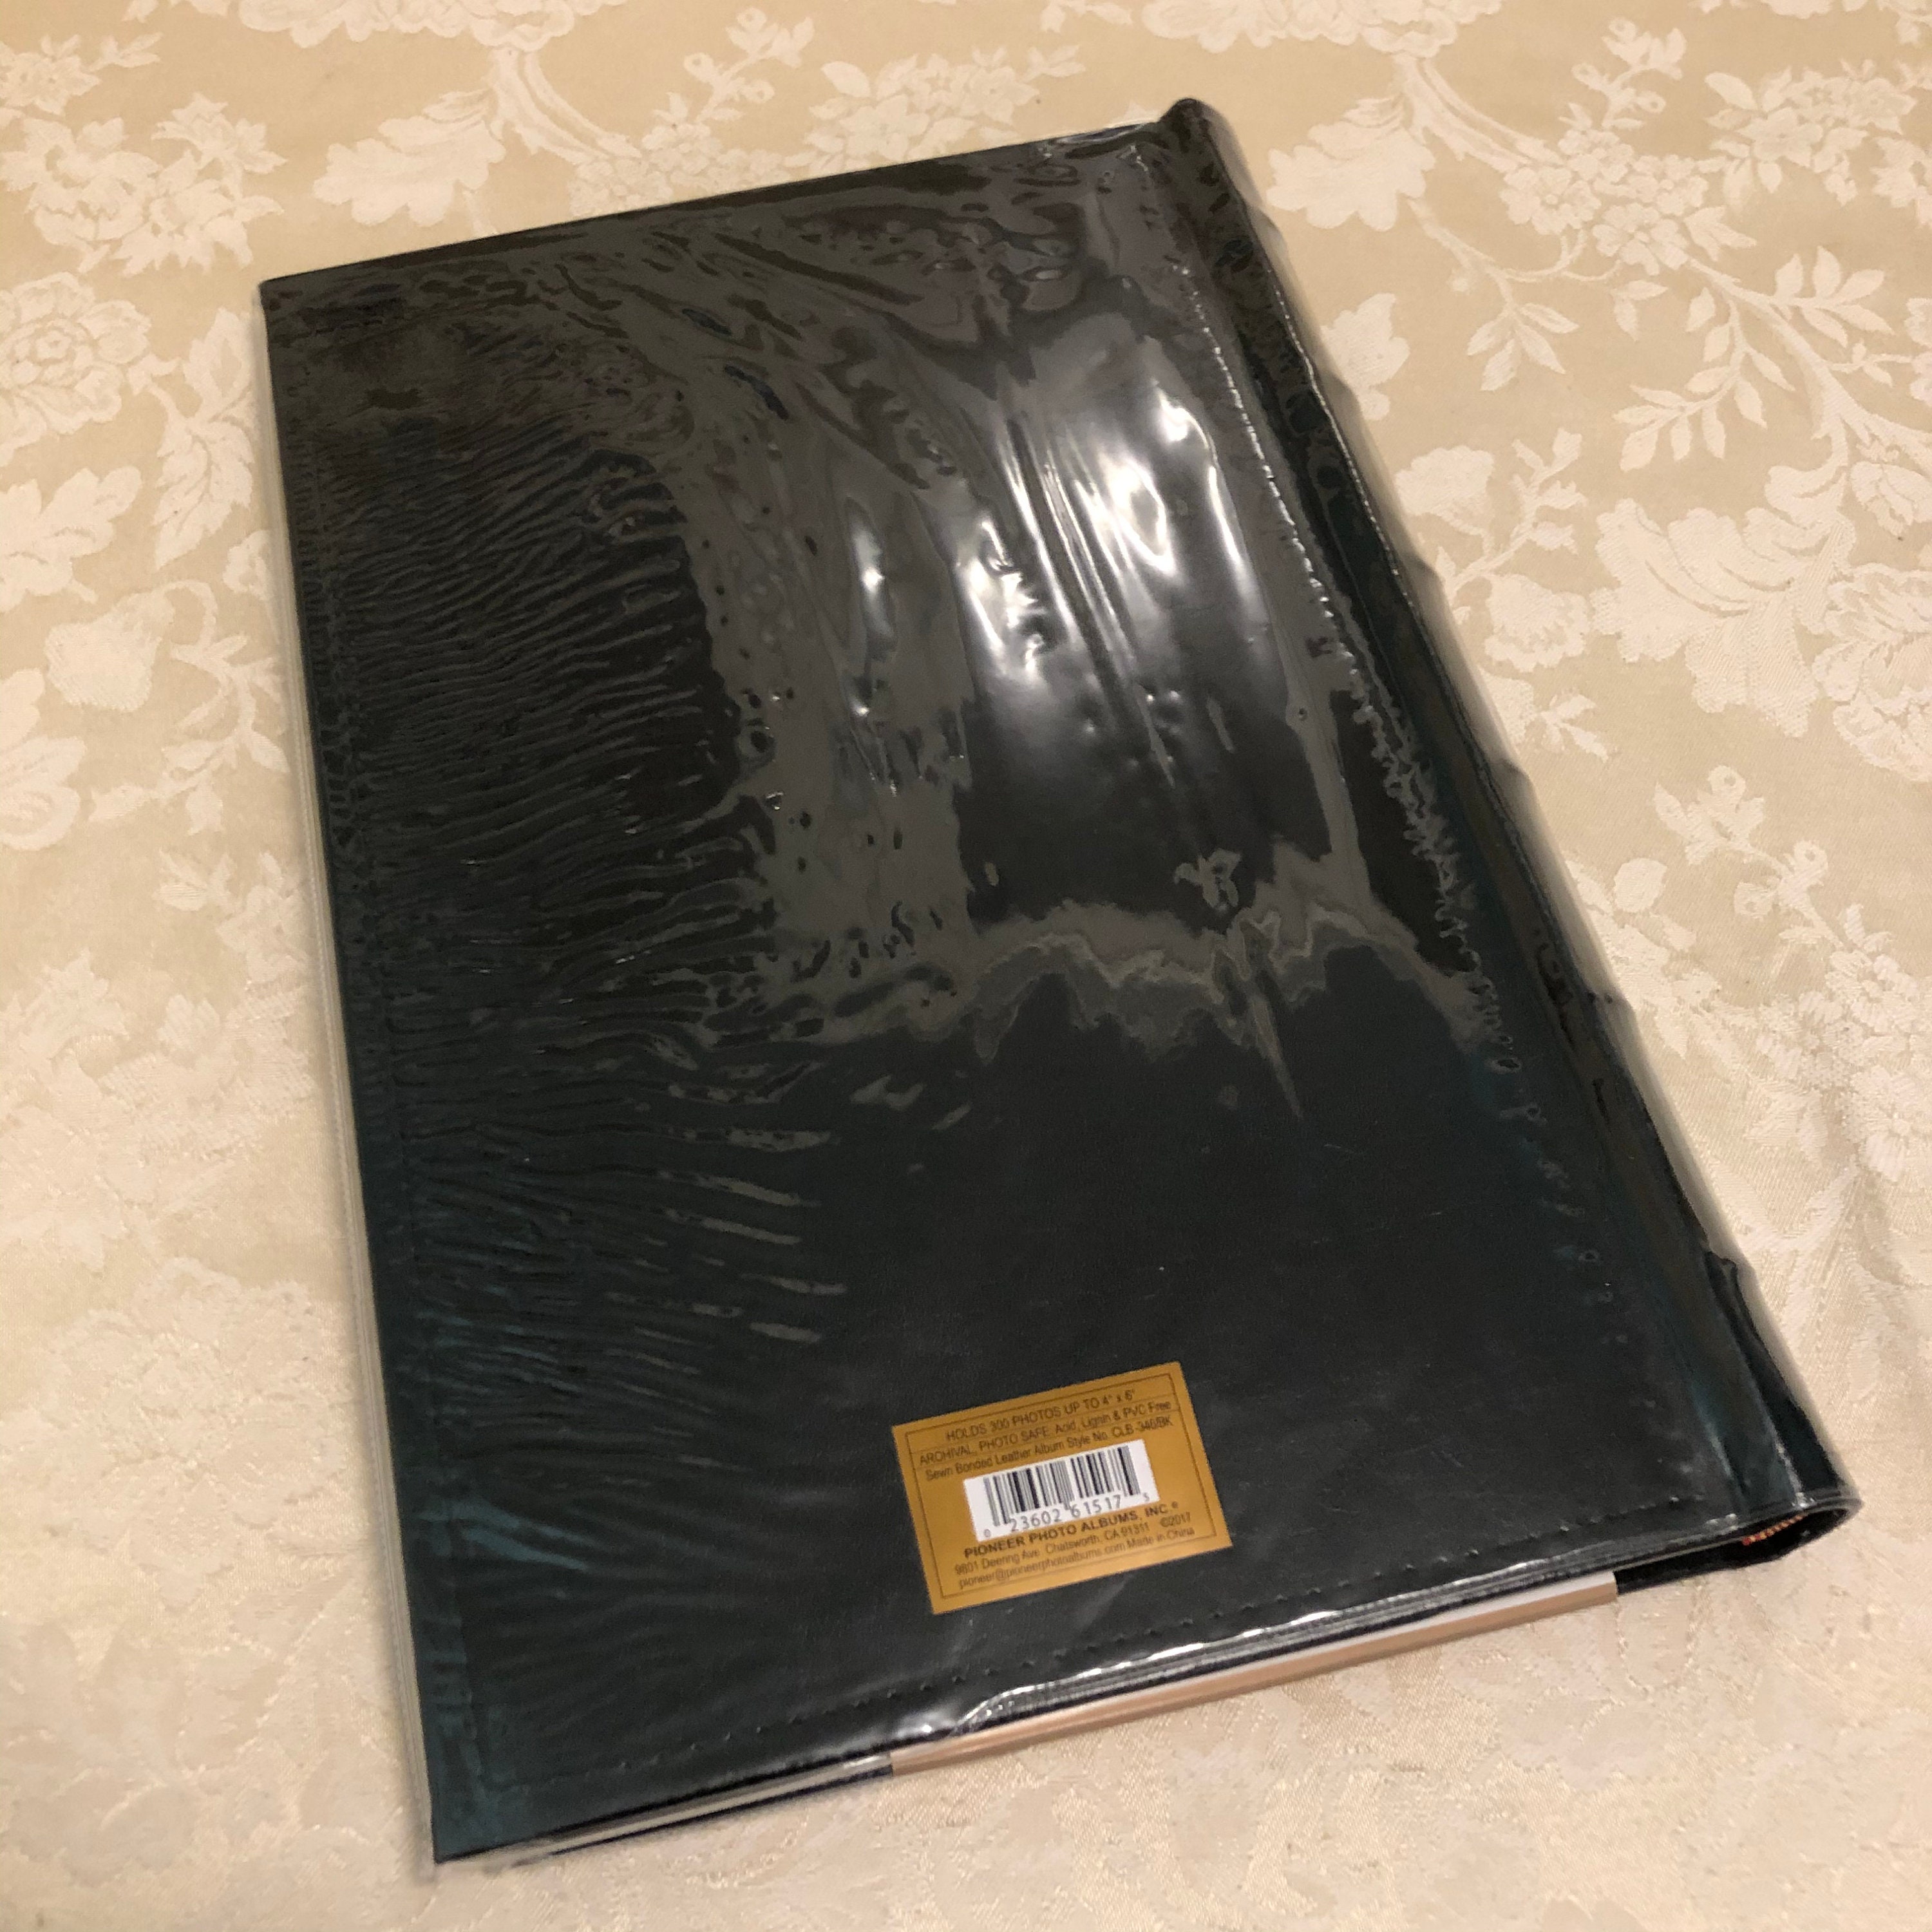  Pioneer Photo Albums Sewn Bonded Leather Bookbound 300